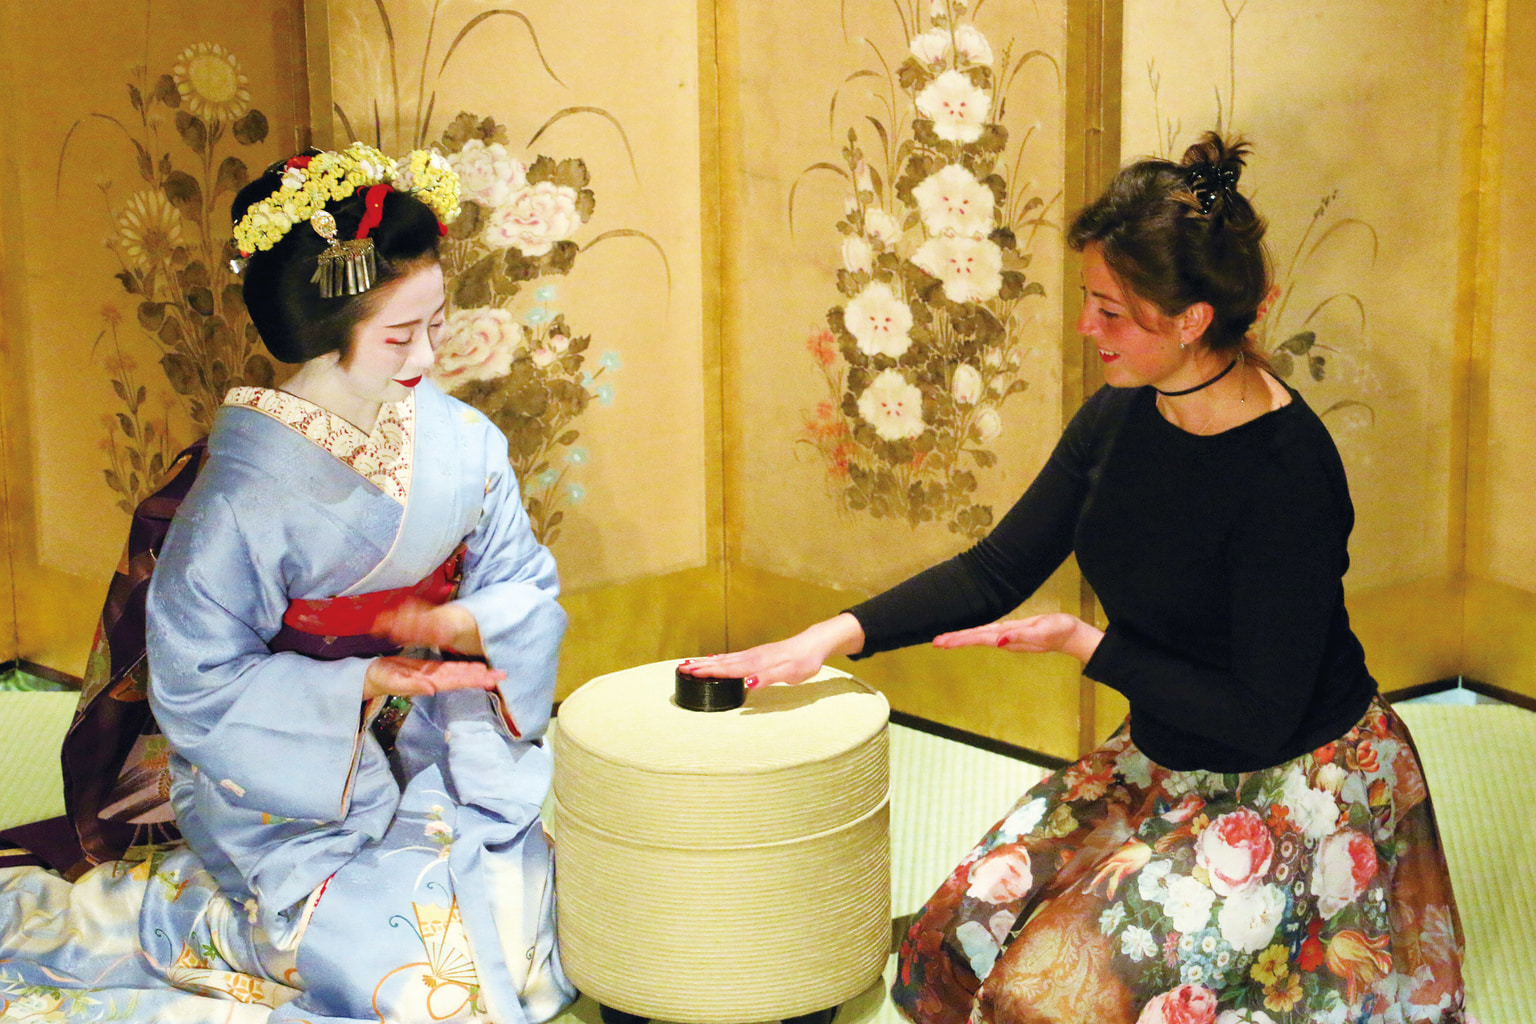 Meet, Speak and Play with Maiko Entertainers in Kyoto